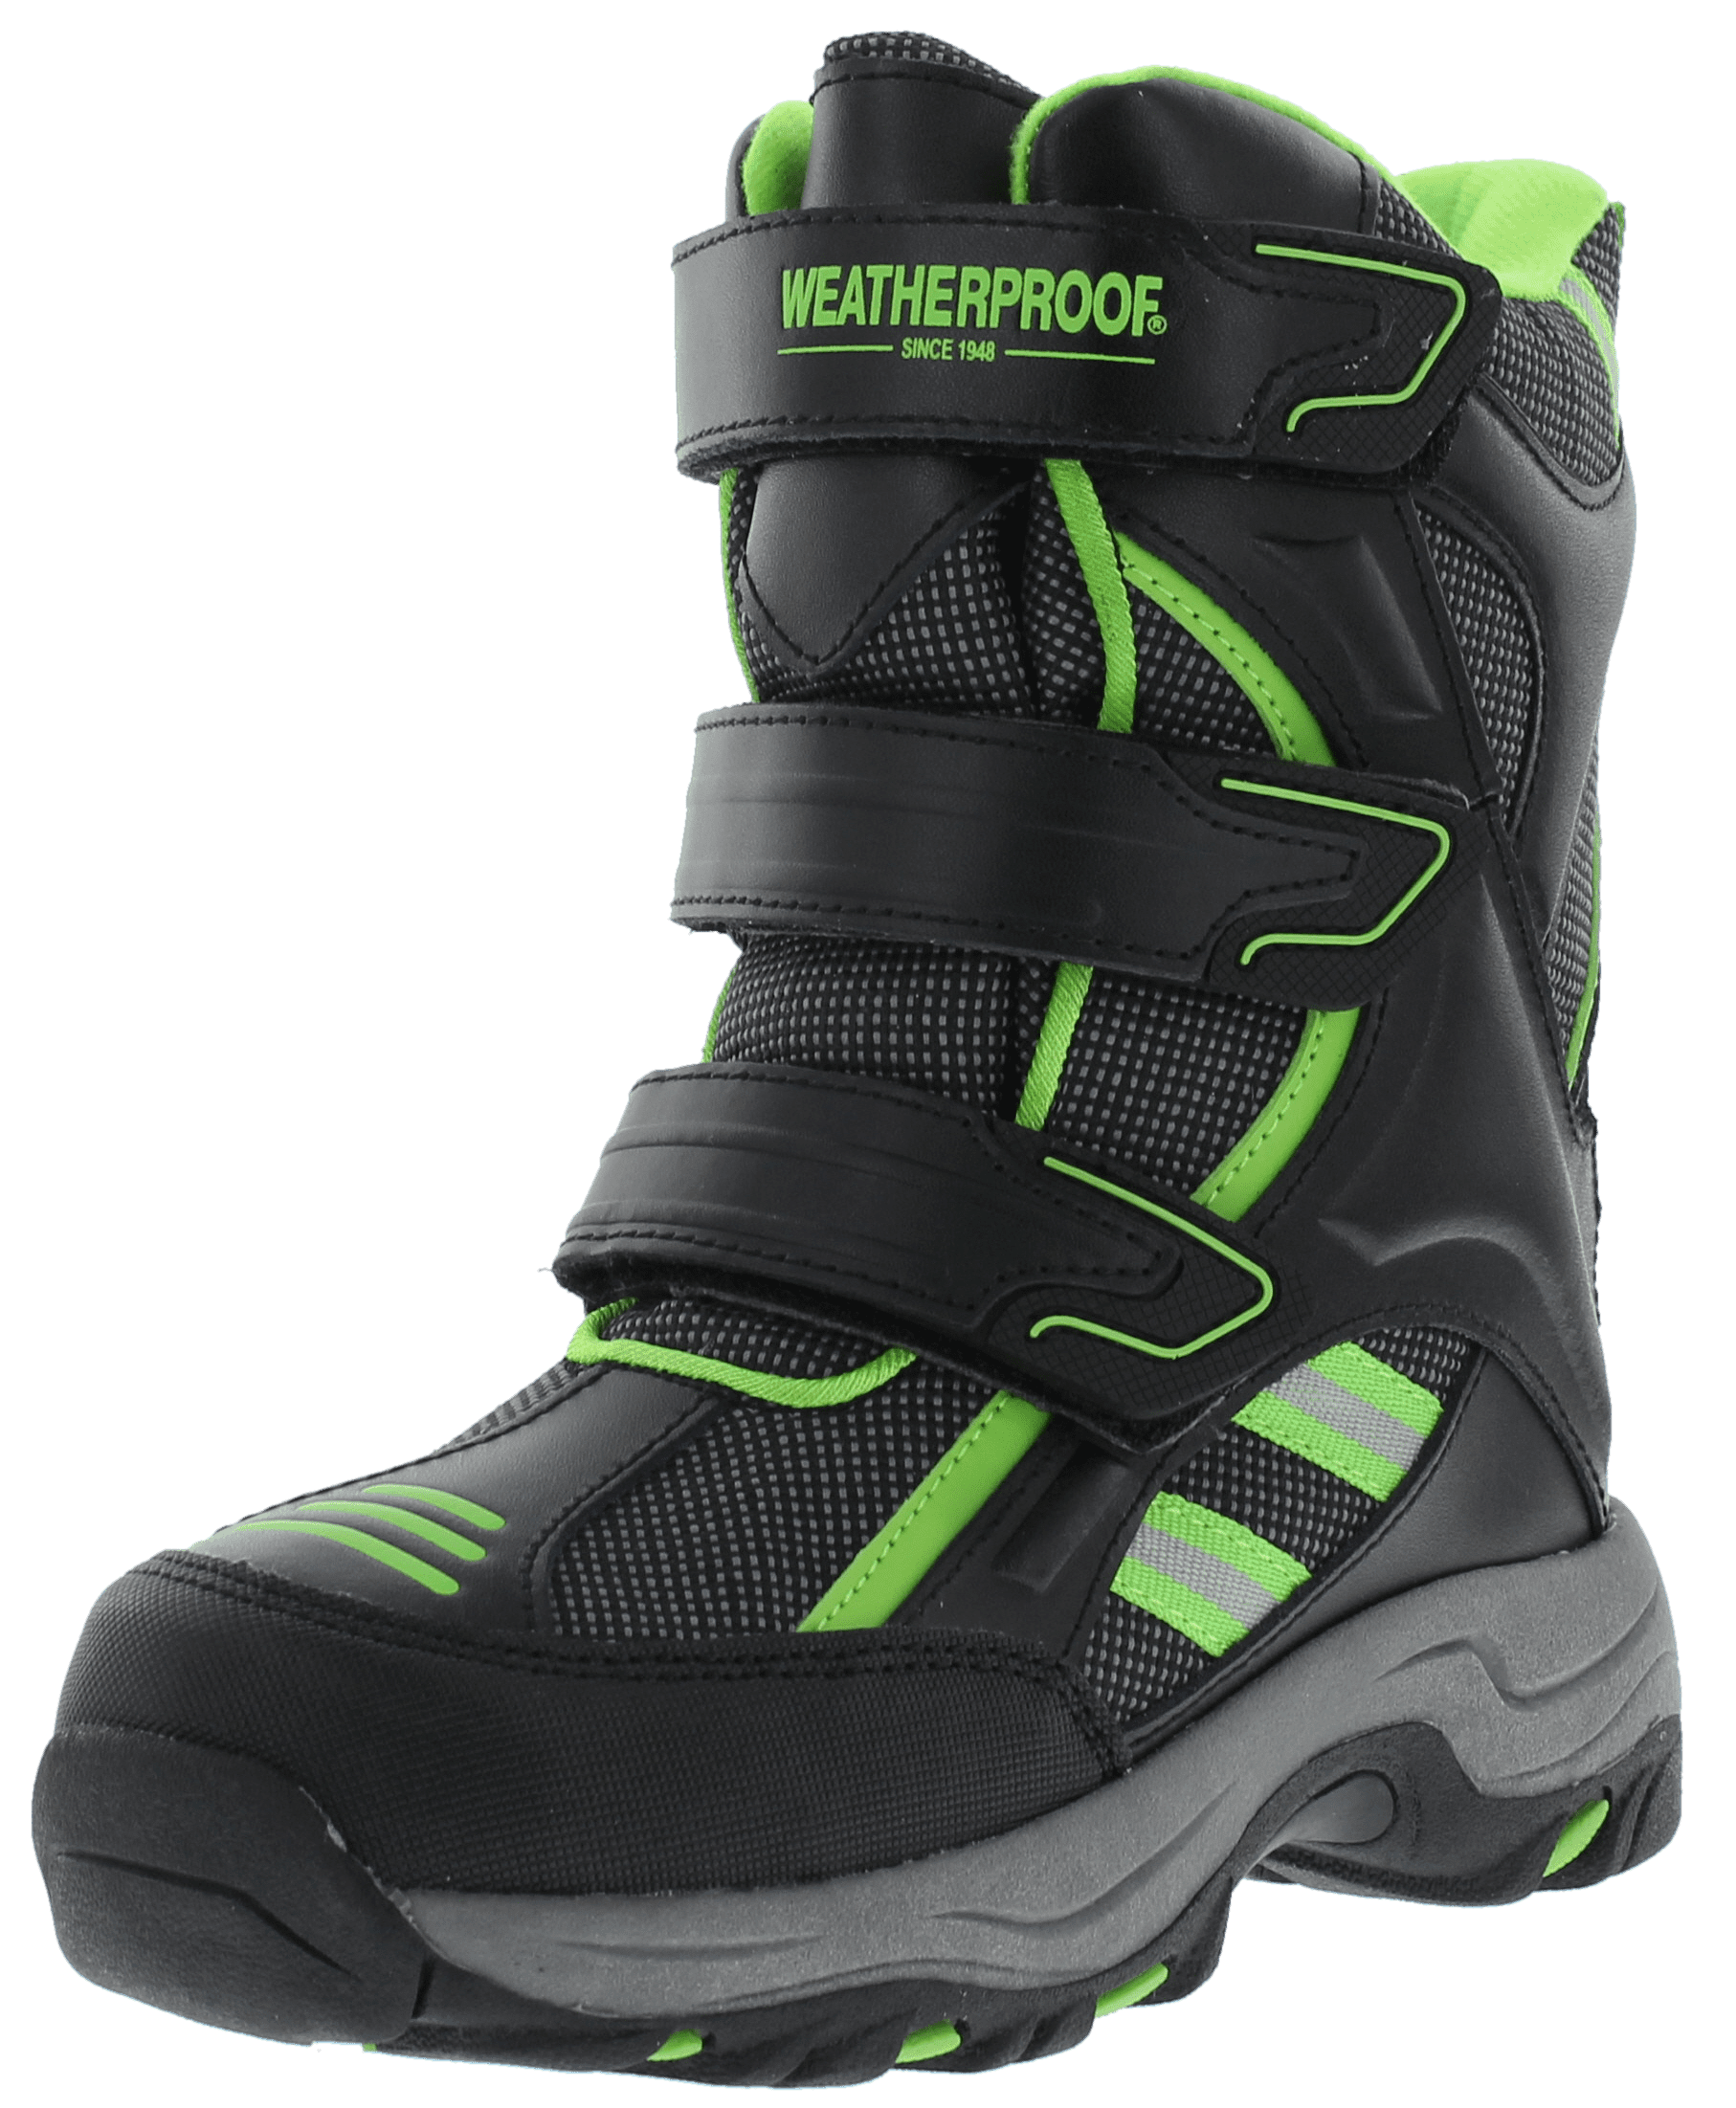 Keeps Feet Warm /& Dry Weatherproof Boys Snow Boots with Multi Hook /& Loop Strap Closures Kody Durability All-Weather Insulated Winter Boots Built for Comfort